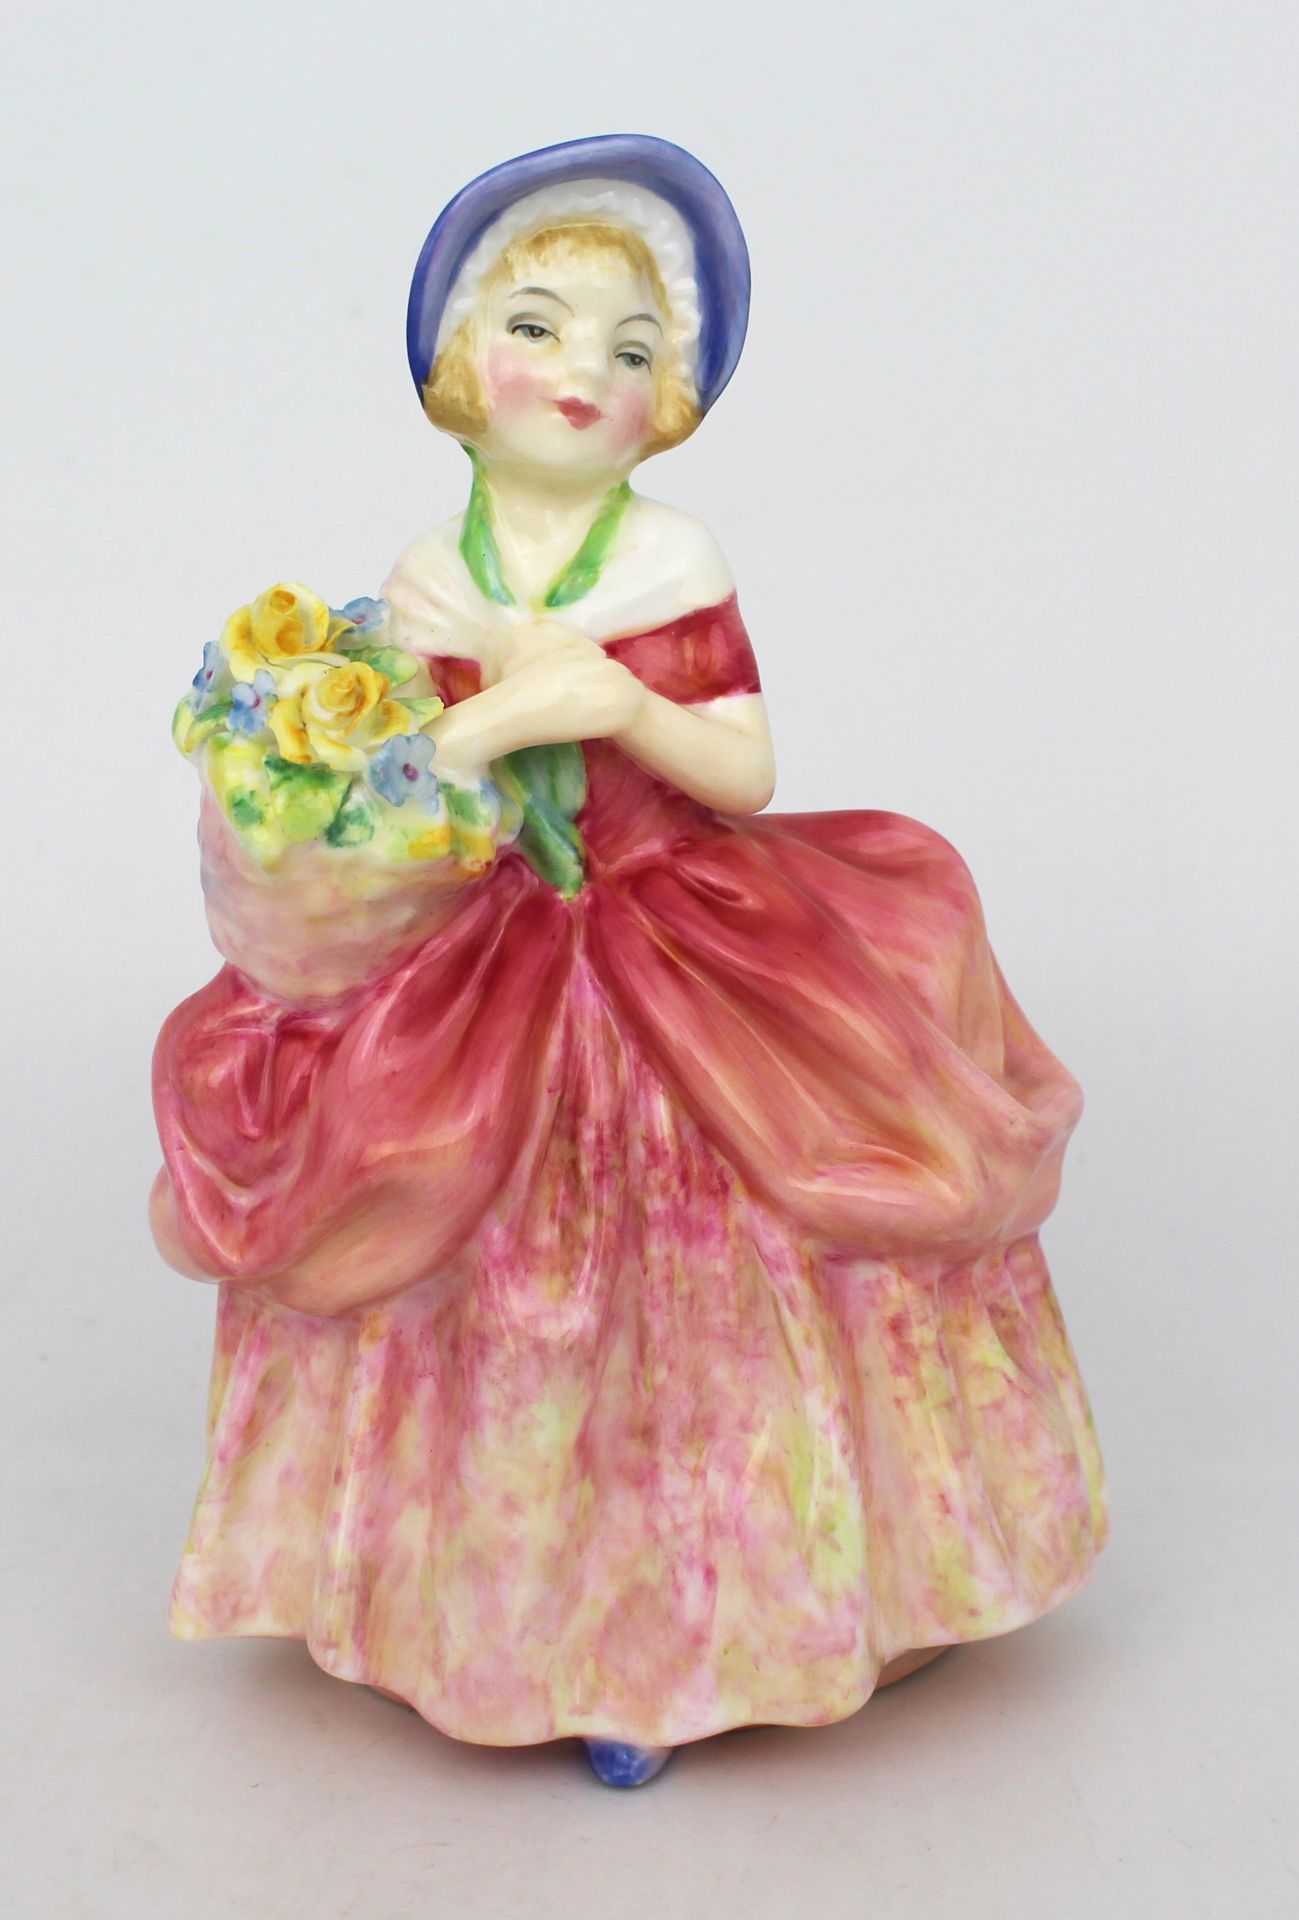 Collection of 4 Royal Doulton Figurines - Image 3 of 8